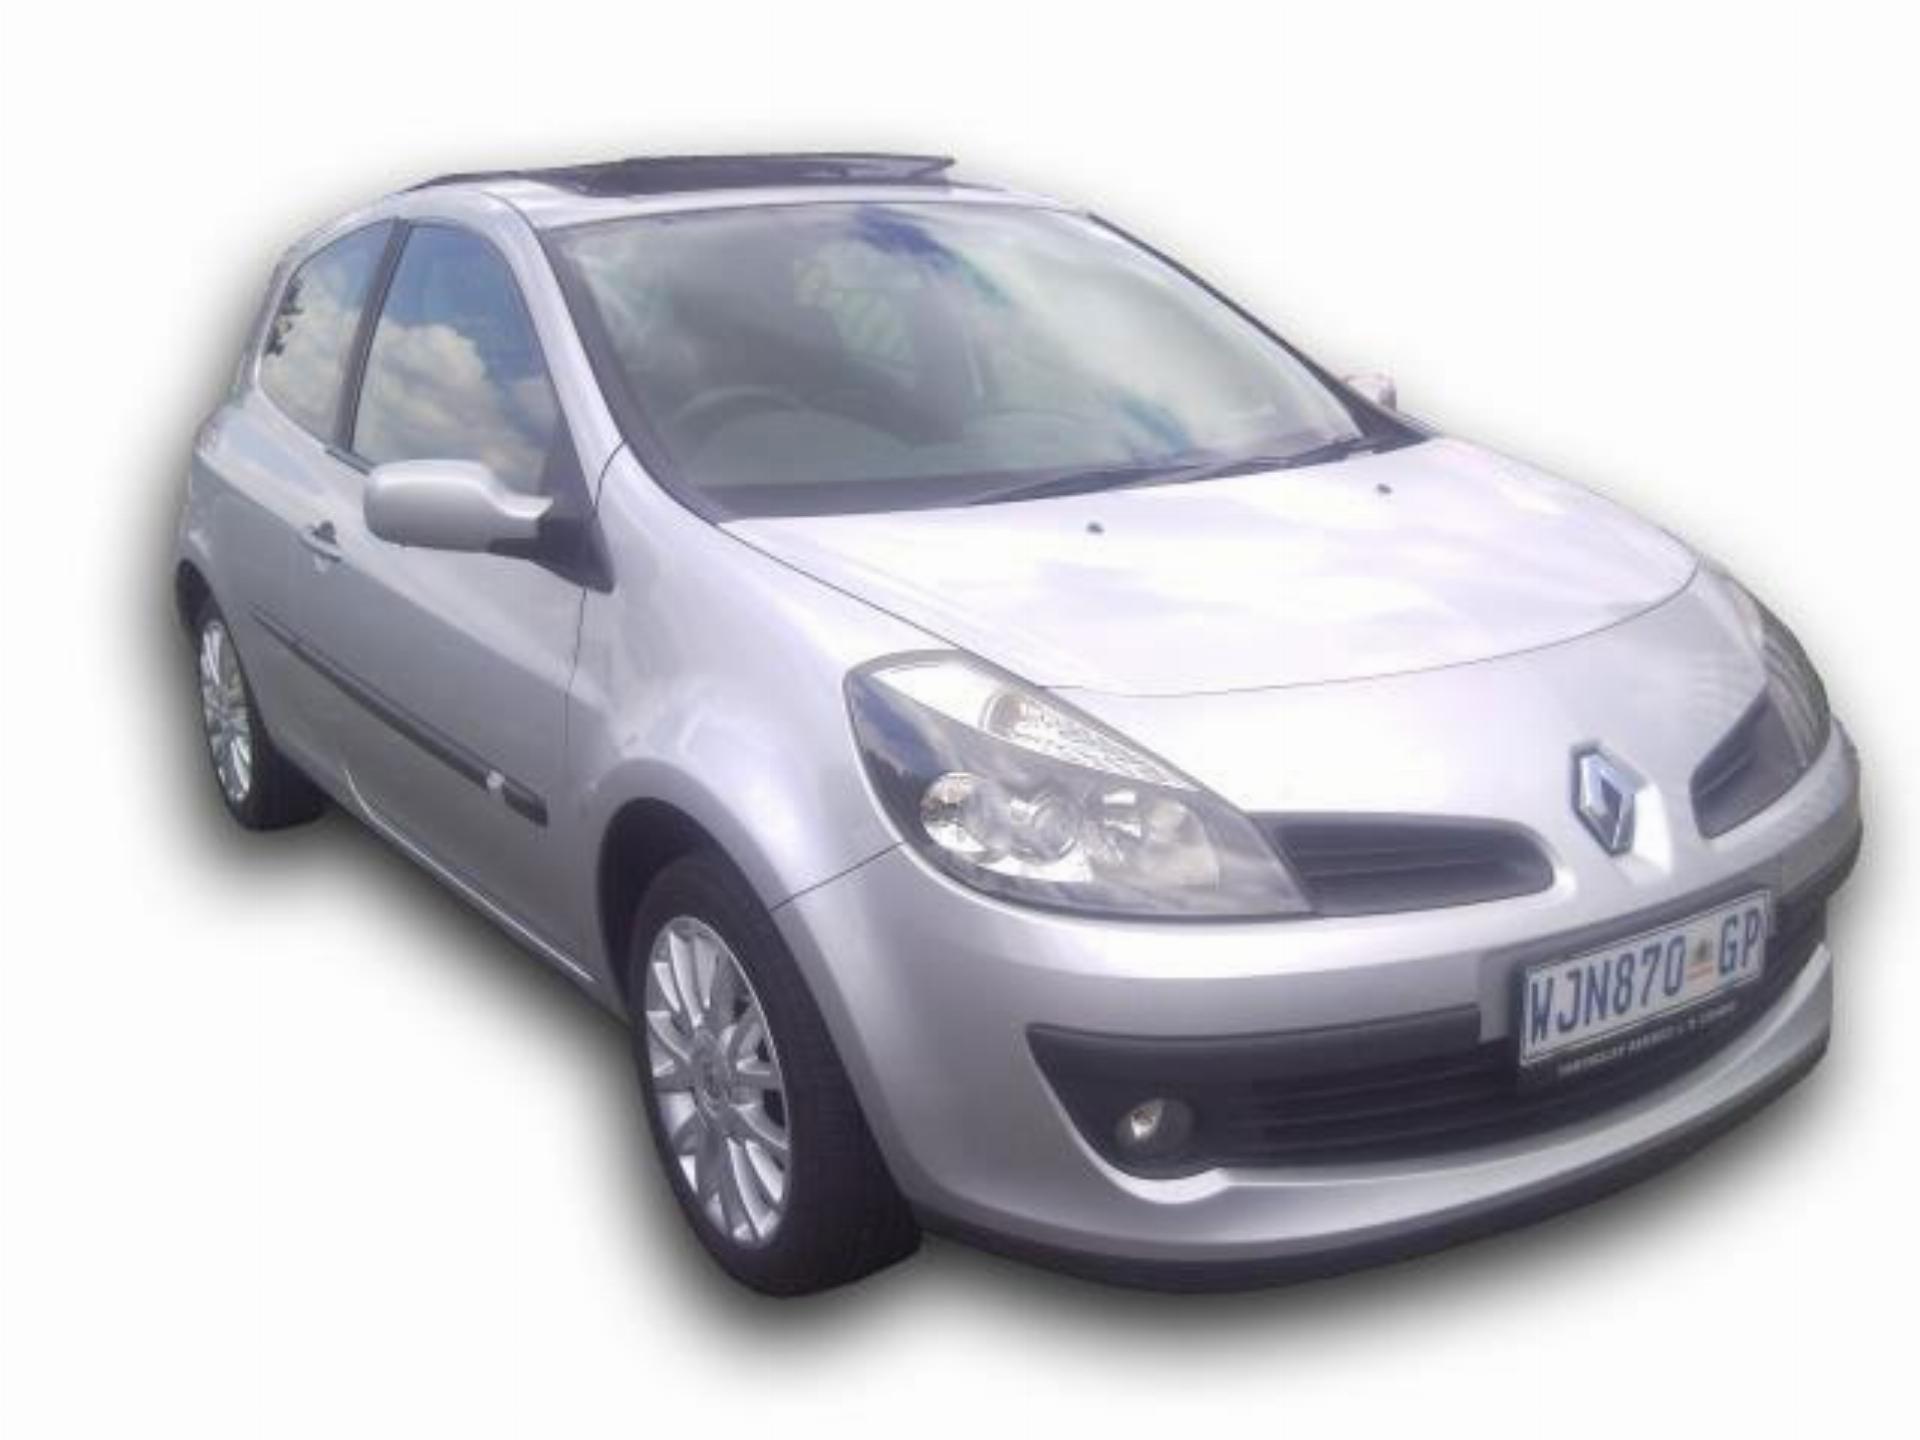 Renault Clio Iii 1.6 Dynamic 3 DR